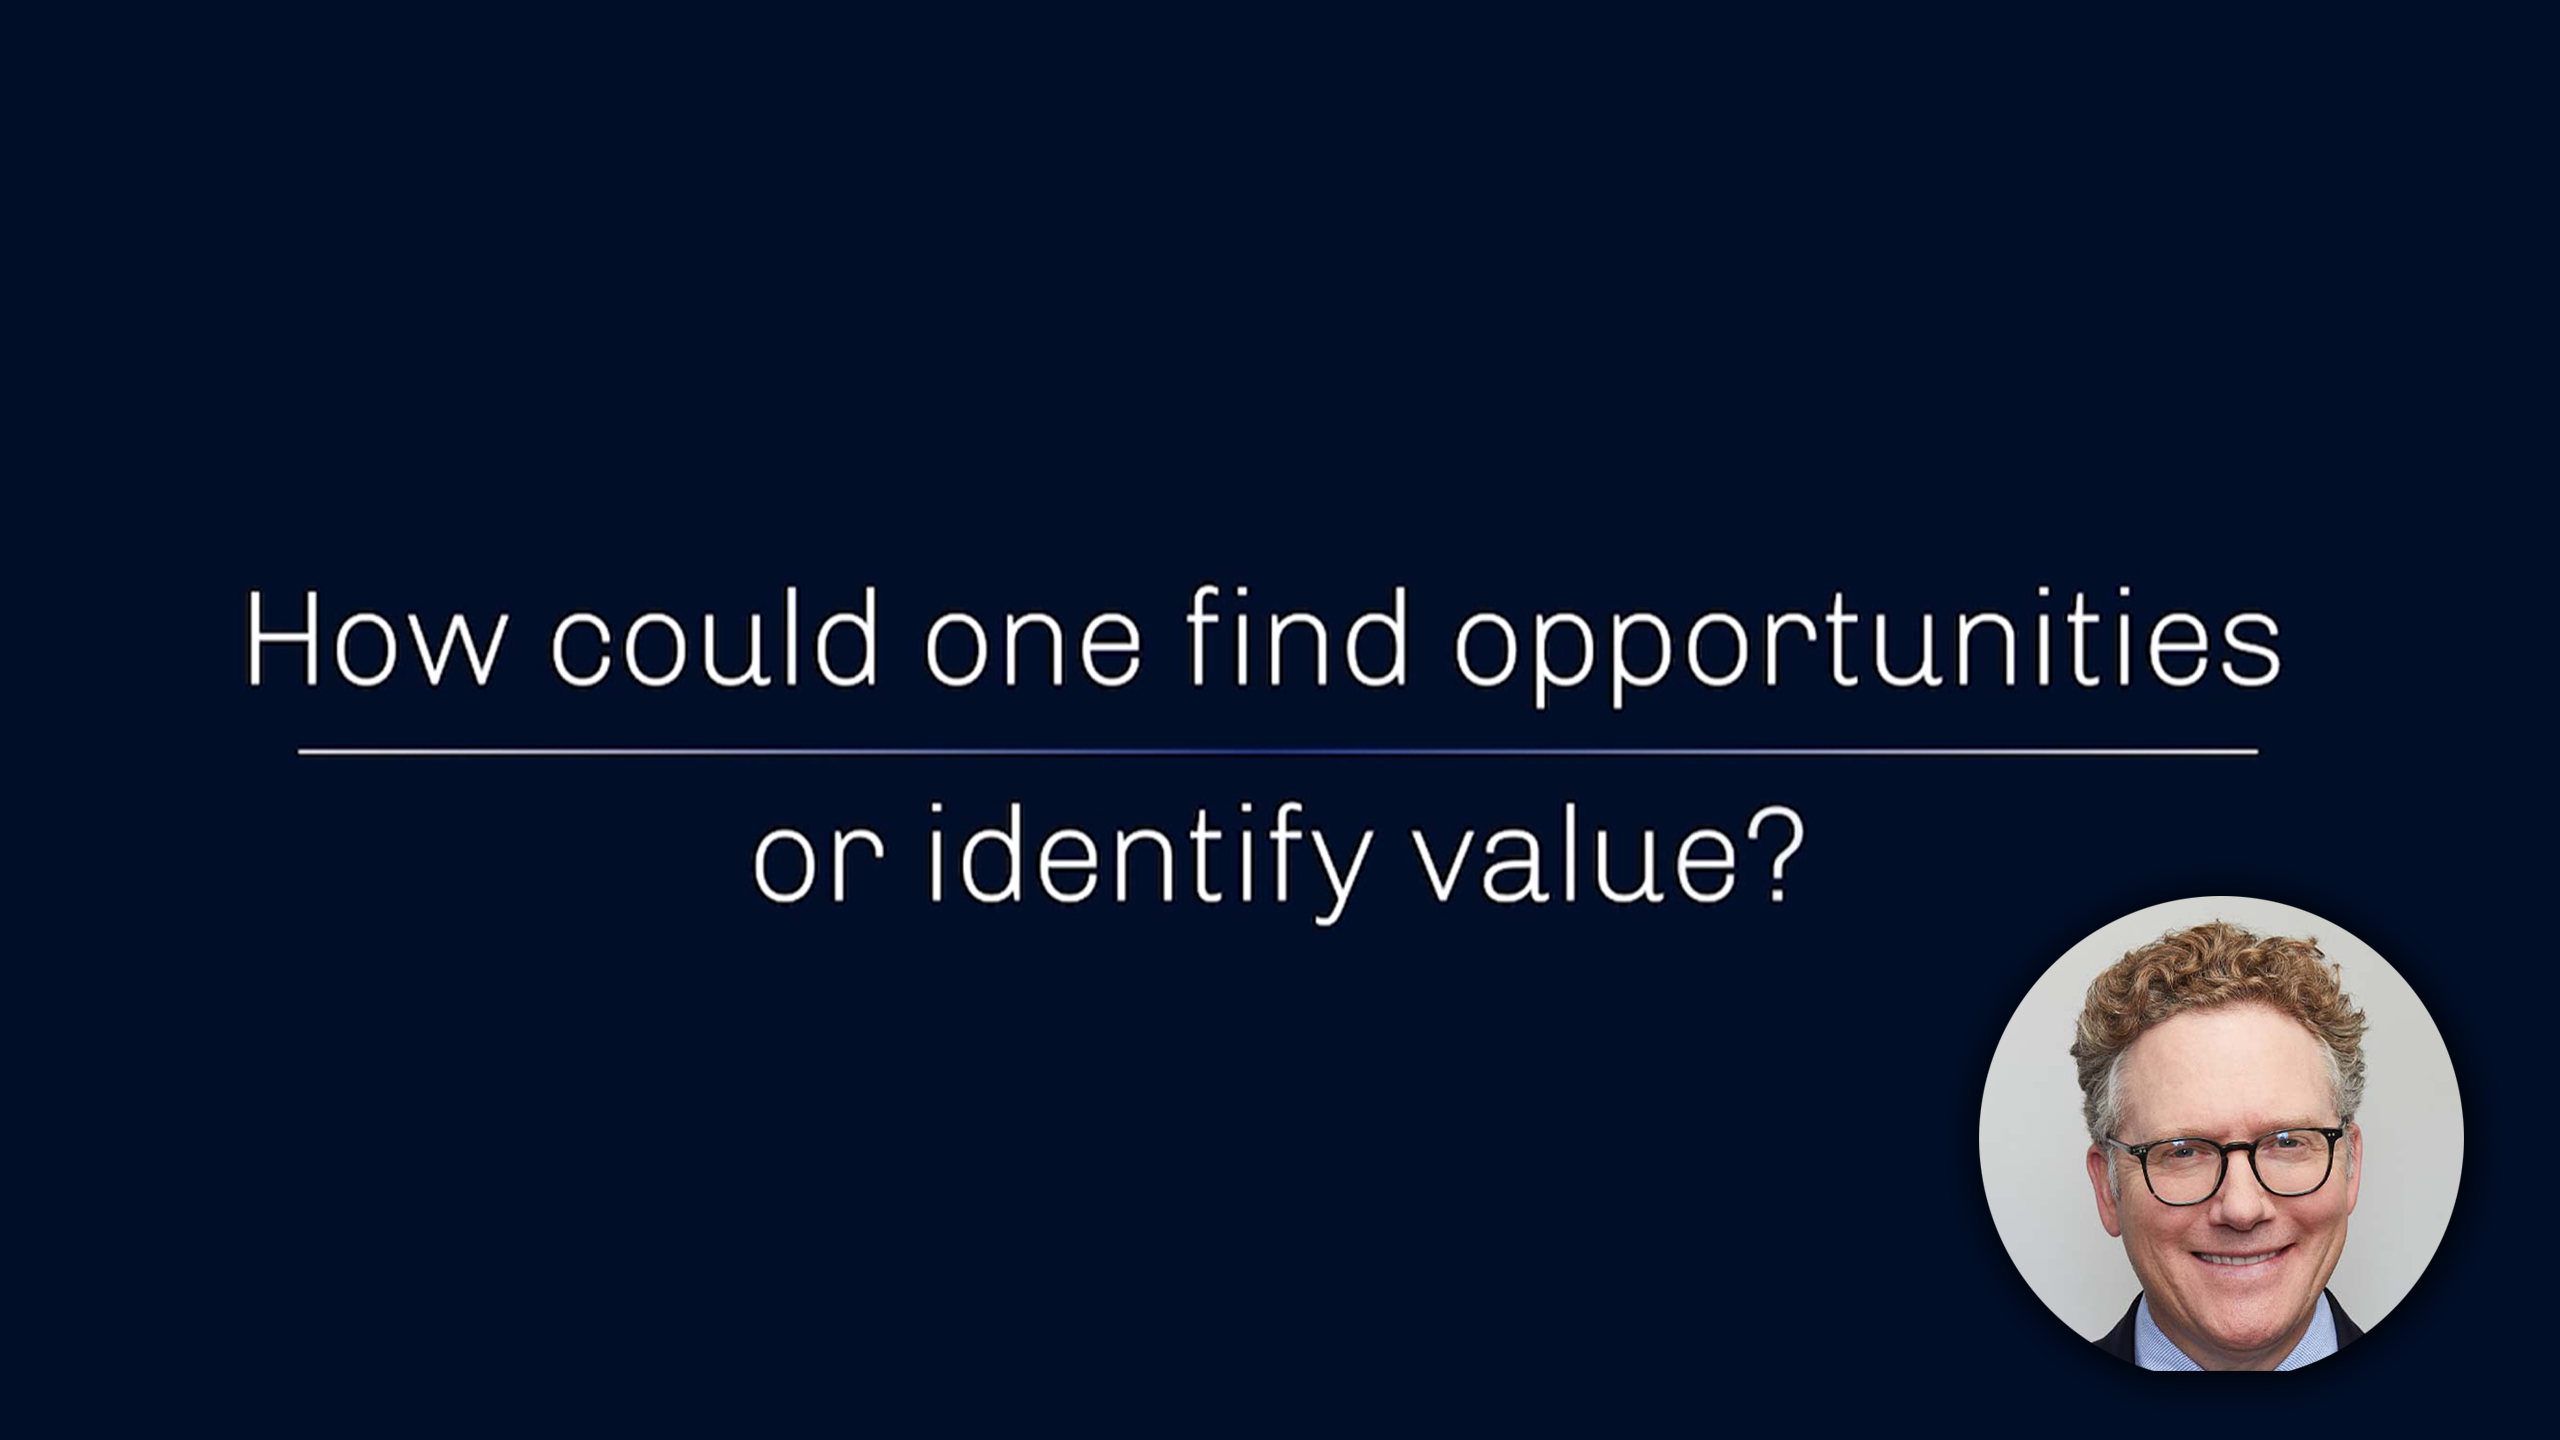 Video - find opportunities